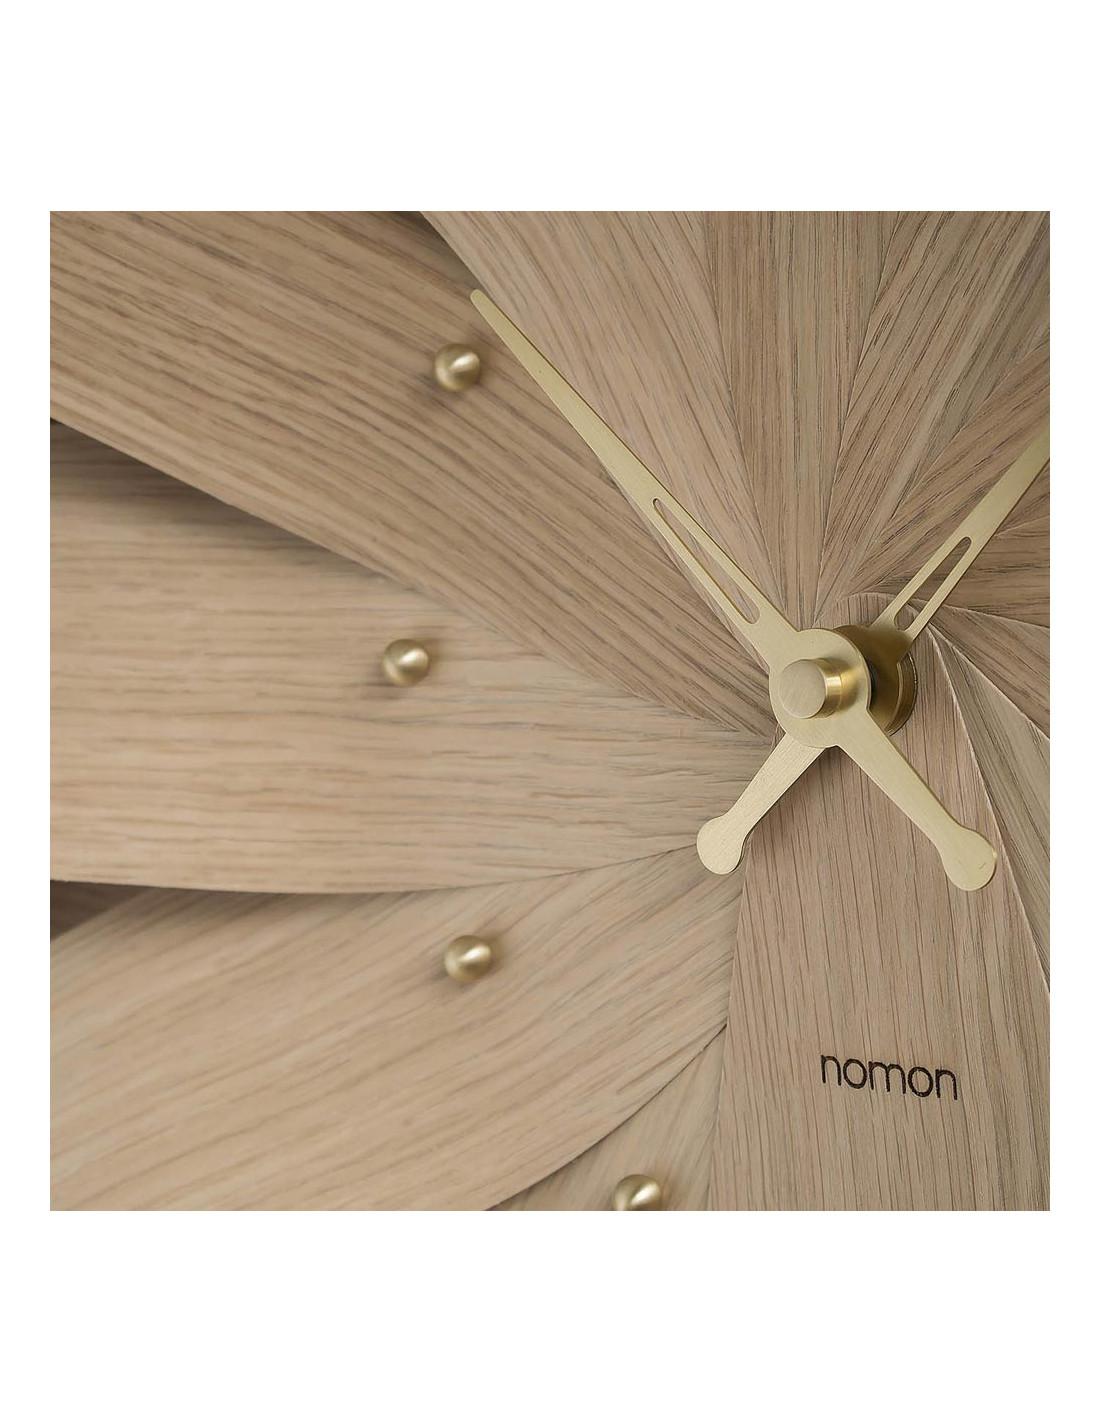 The Brisa G wall clock is composed of natural walnut or oak leaves and its hands and time signals are available in polished brass.
Brisa G wall clock: Body in walnut , Oak or both walnut and Oak , hands and time signals in polished brass.
Each